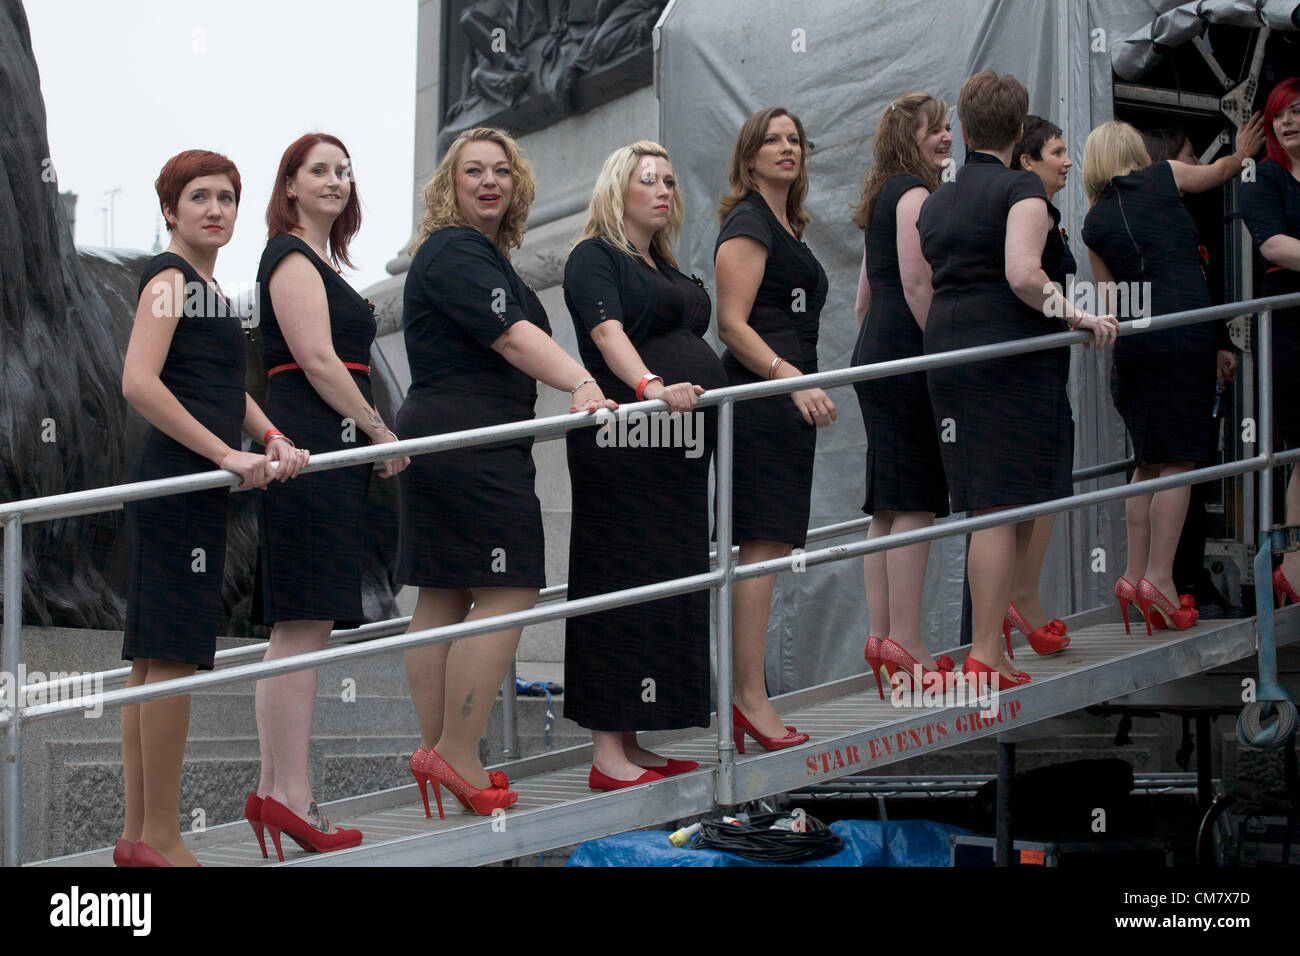 24th October 2012. London UK. Military Wives Choir from RAF Wattingsham in Suffolk are invited to perform in  free a concert during the National Launch of the Royal British Legion Poppy Appeal  in Trafalgar Square. The  aim of the Poppy appeal is to  raise 42 Million pounds to help service personel and their families. The Choir was formed  in January 2012  by Sally Wilkinson when her husband was in operations in Afghanistan Credit:  amer ghazzal / Alamy Live News Stock Photo